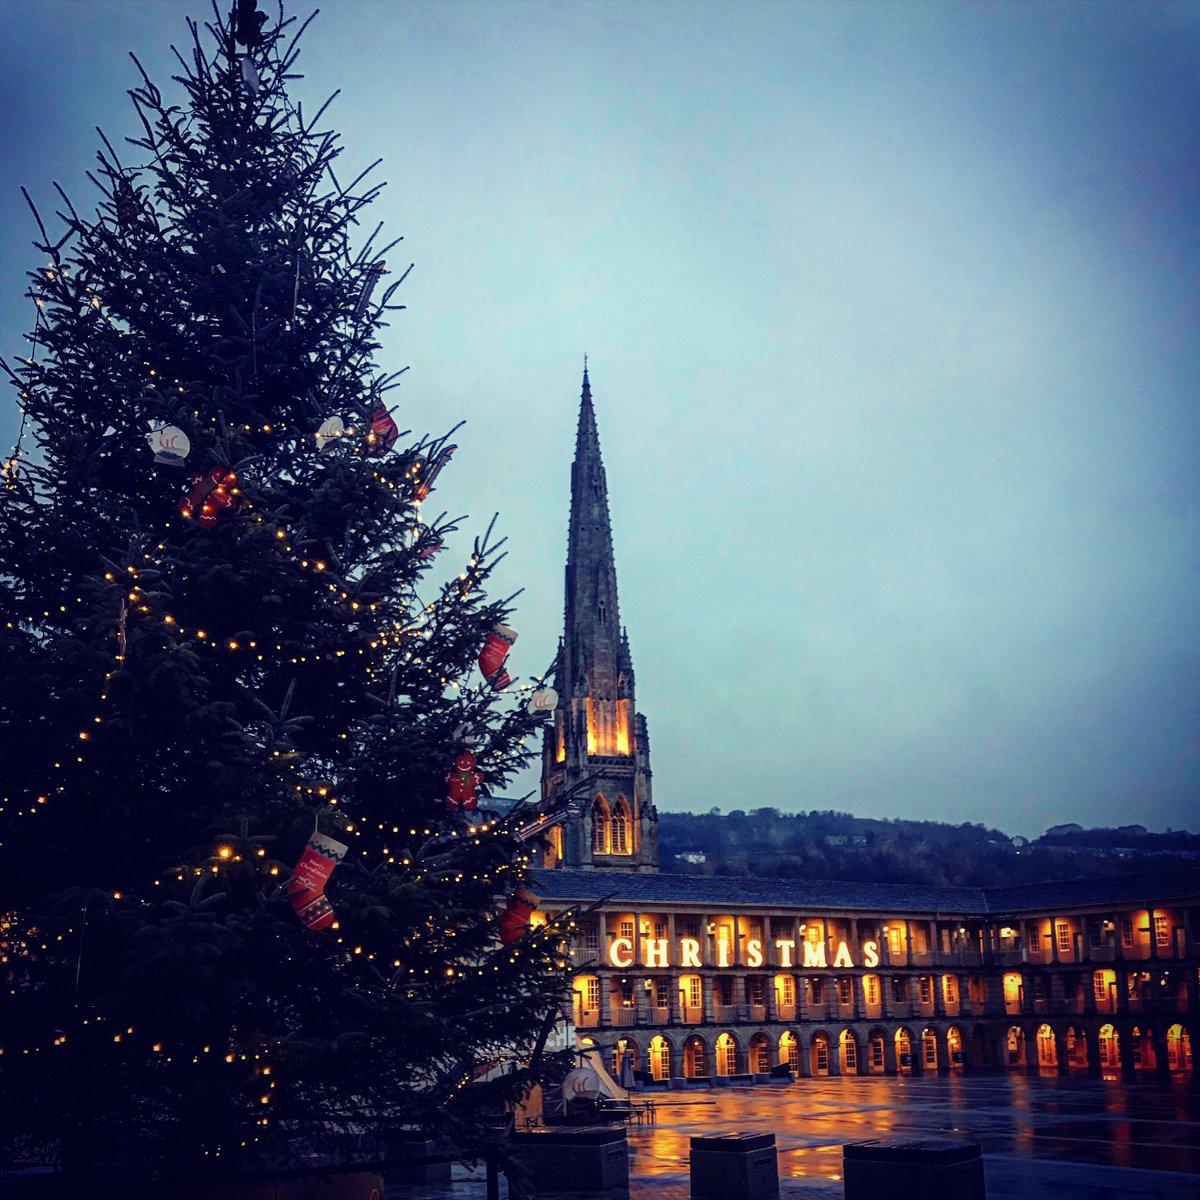 Christmas has arrived at @thepiecehall in Halifax🎄 #christmasdecorations #christmastree #christmasshopping #halifaxwestyorkshire